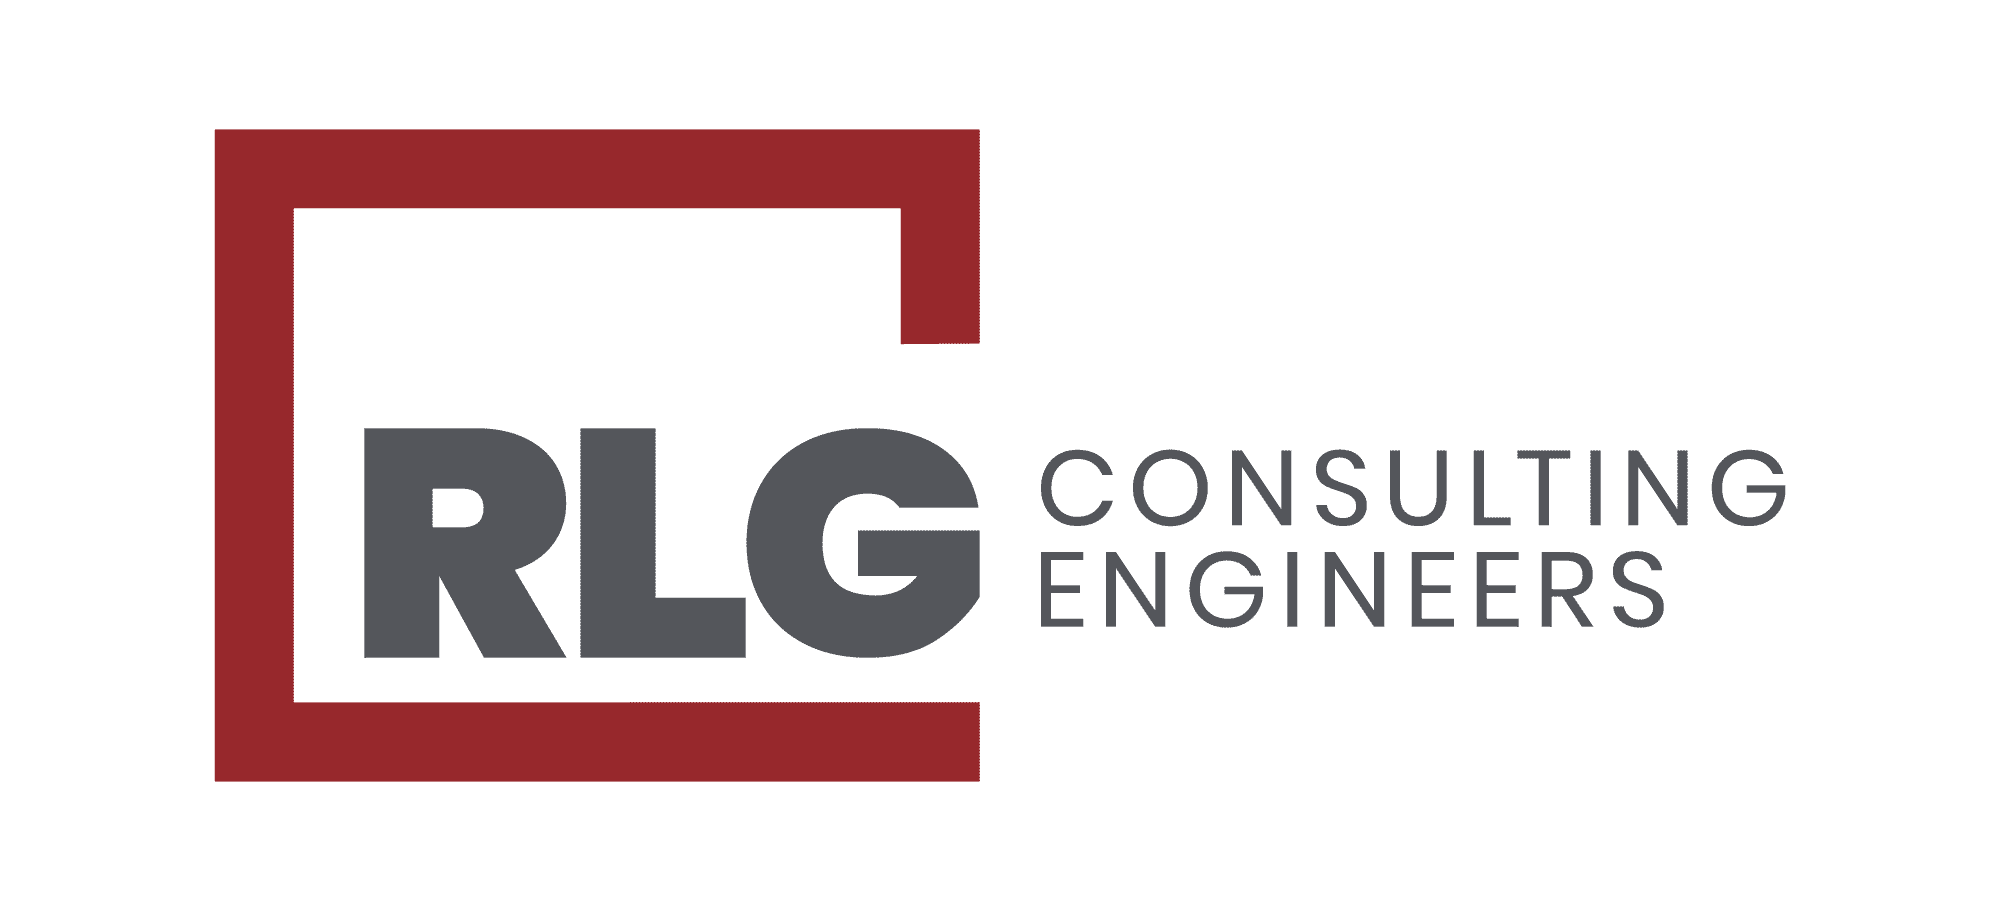 RLG Consulting Engineers